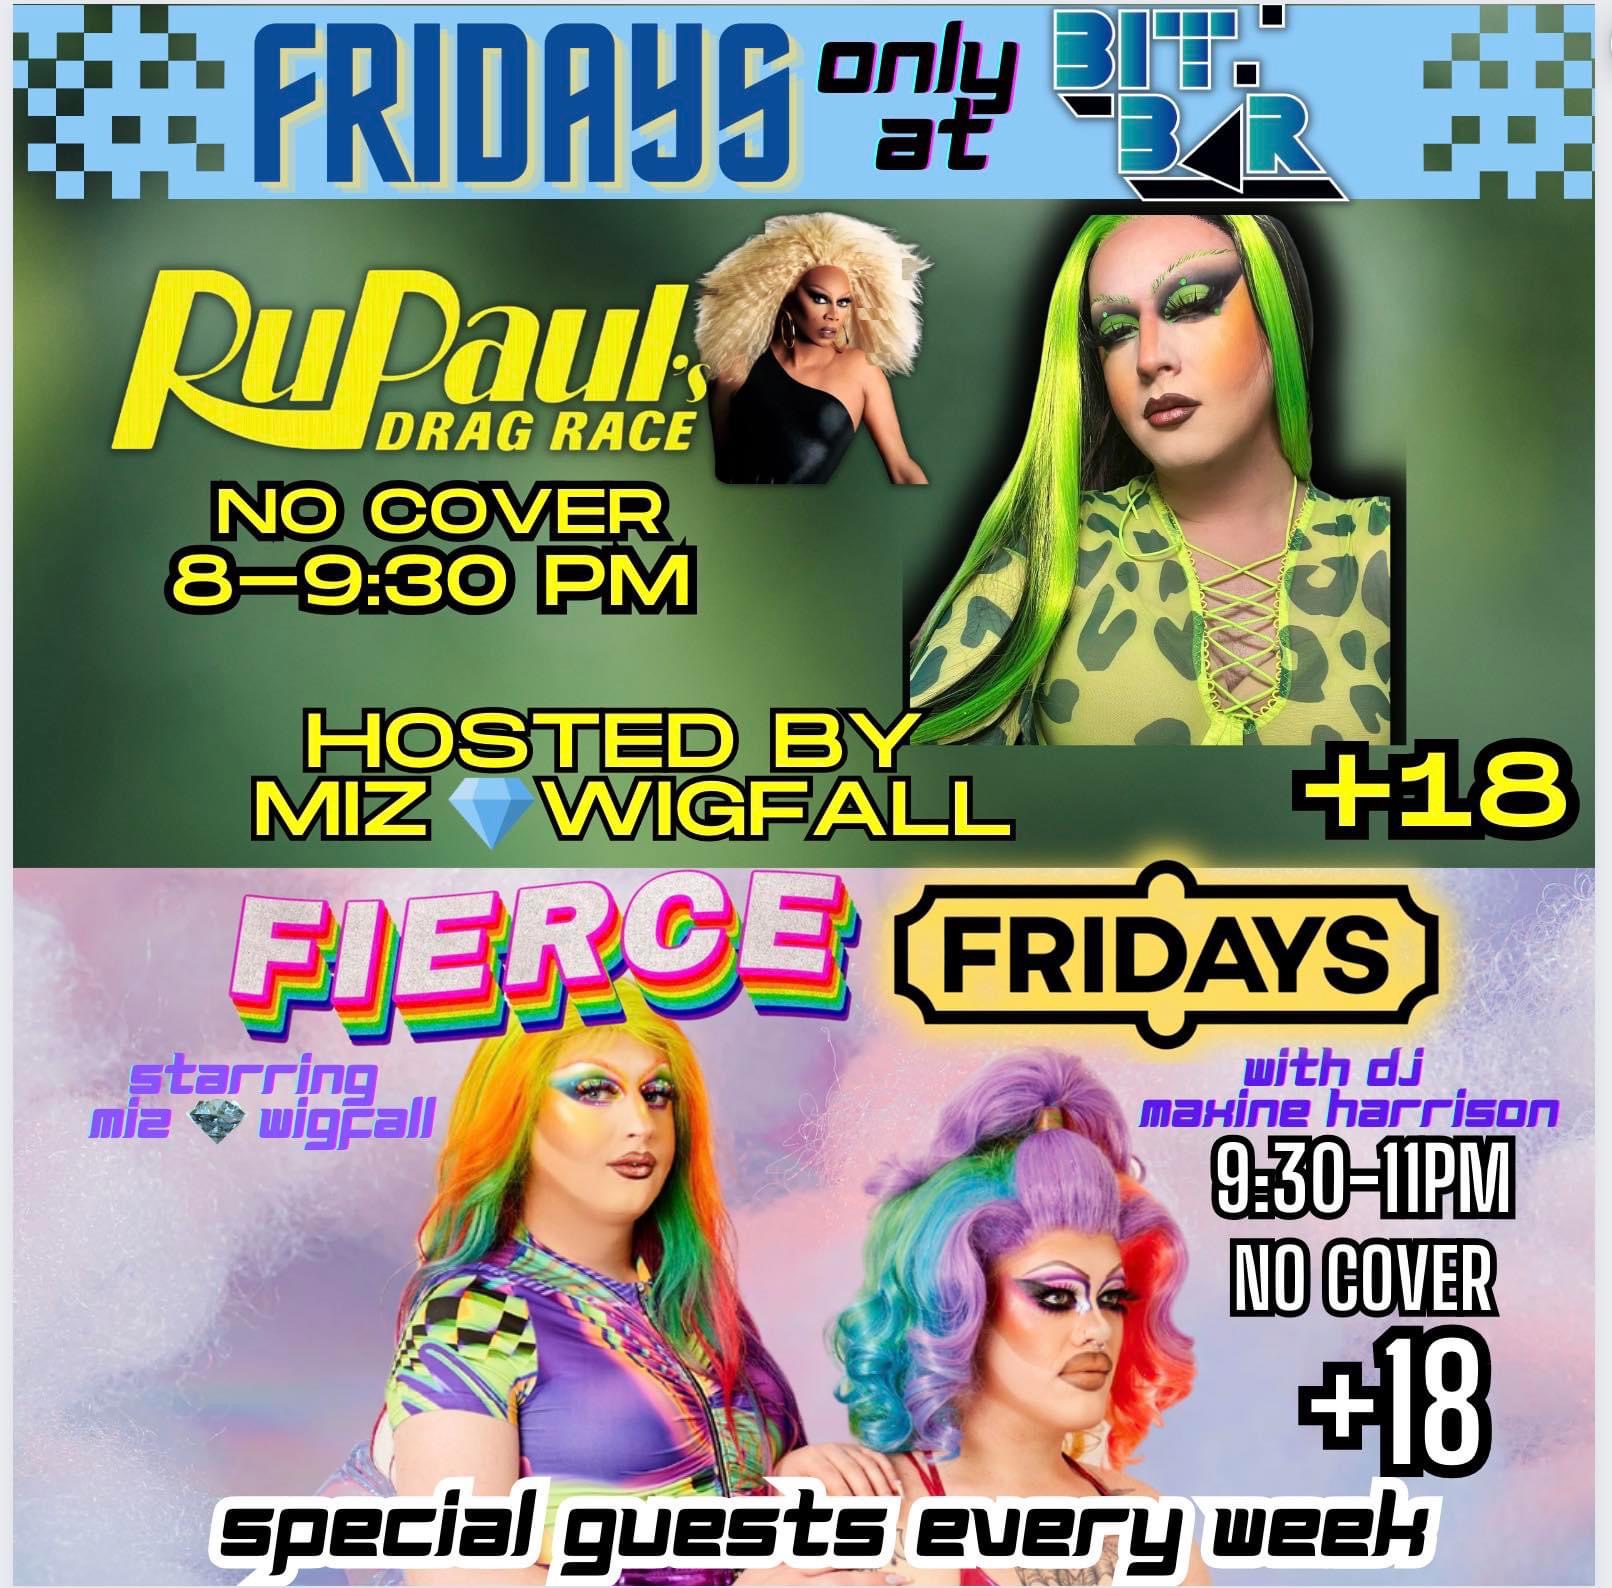 An eye-catching promotional poster for a drag race event showcasing vibrant photos of drag queens, complete with details about the event and neon text presented on a lively backdrop.